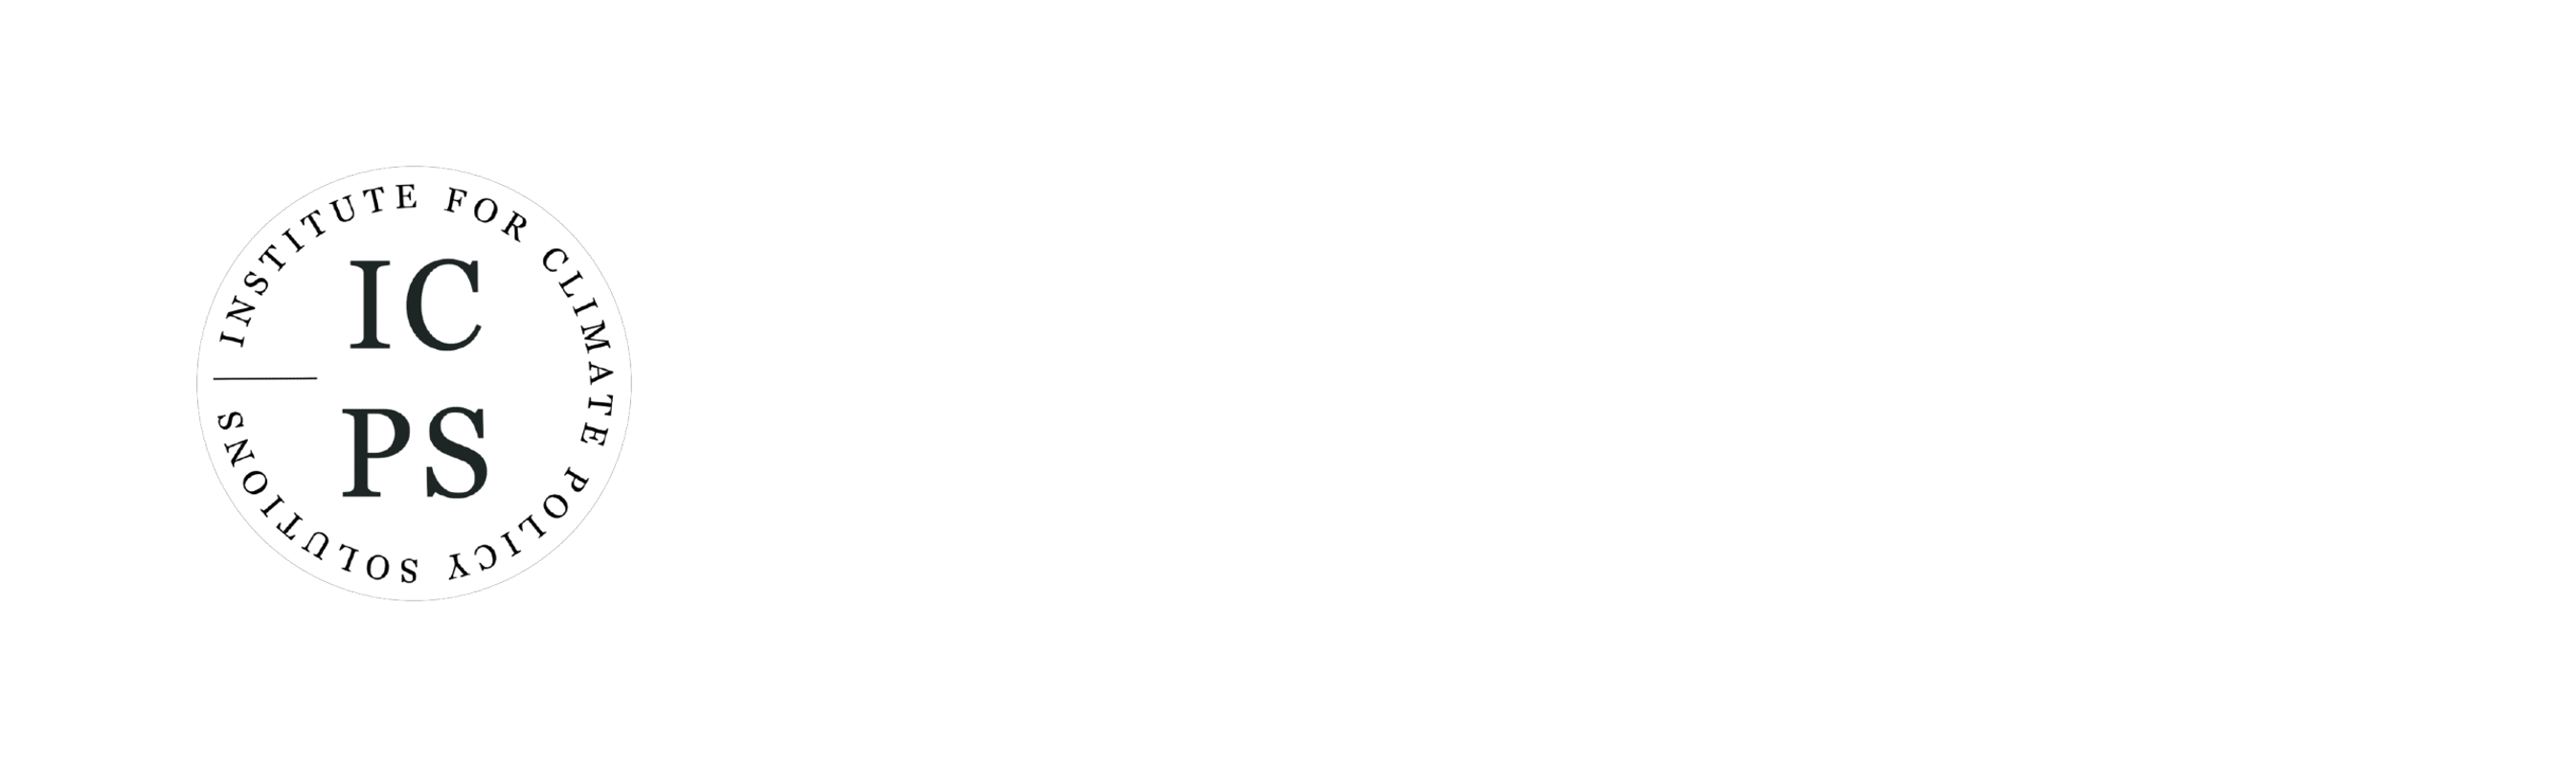 The Institute for Climate Policy Solutions